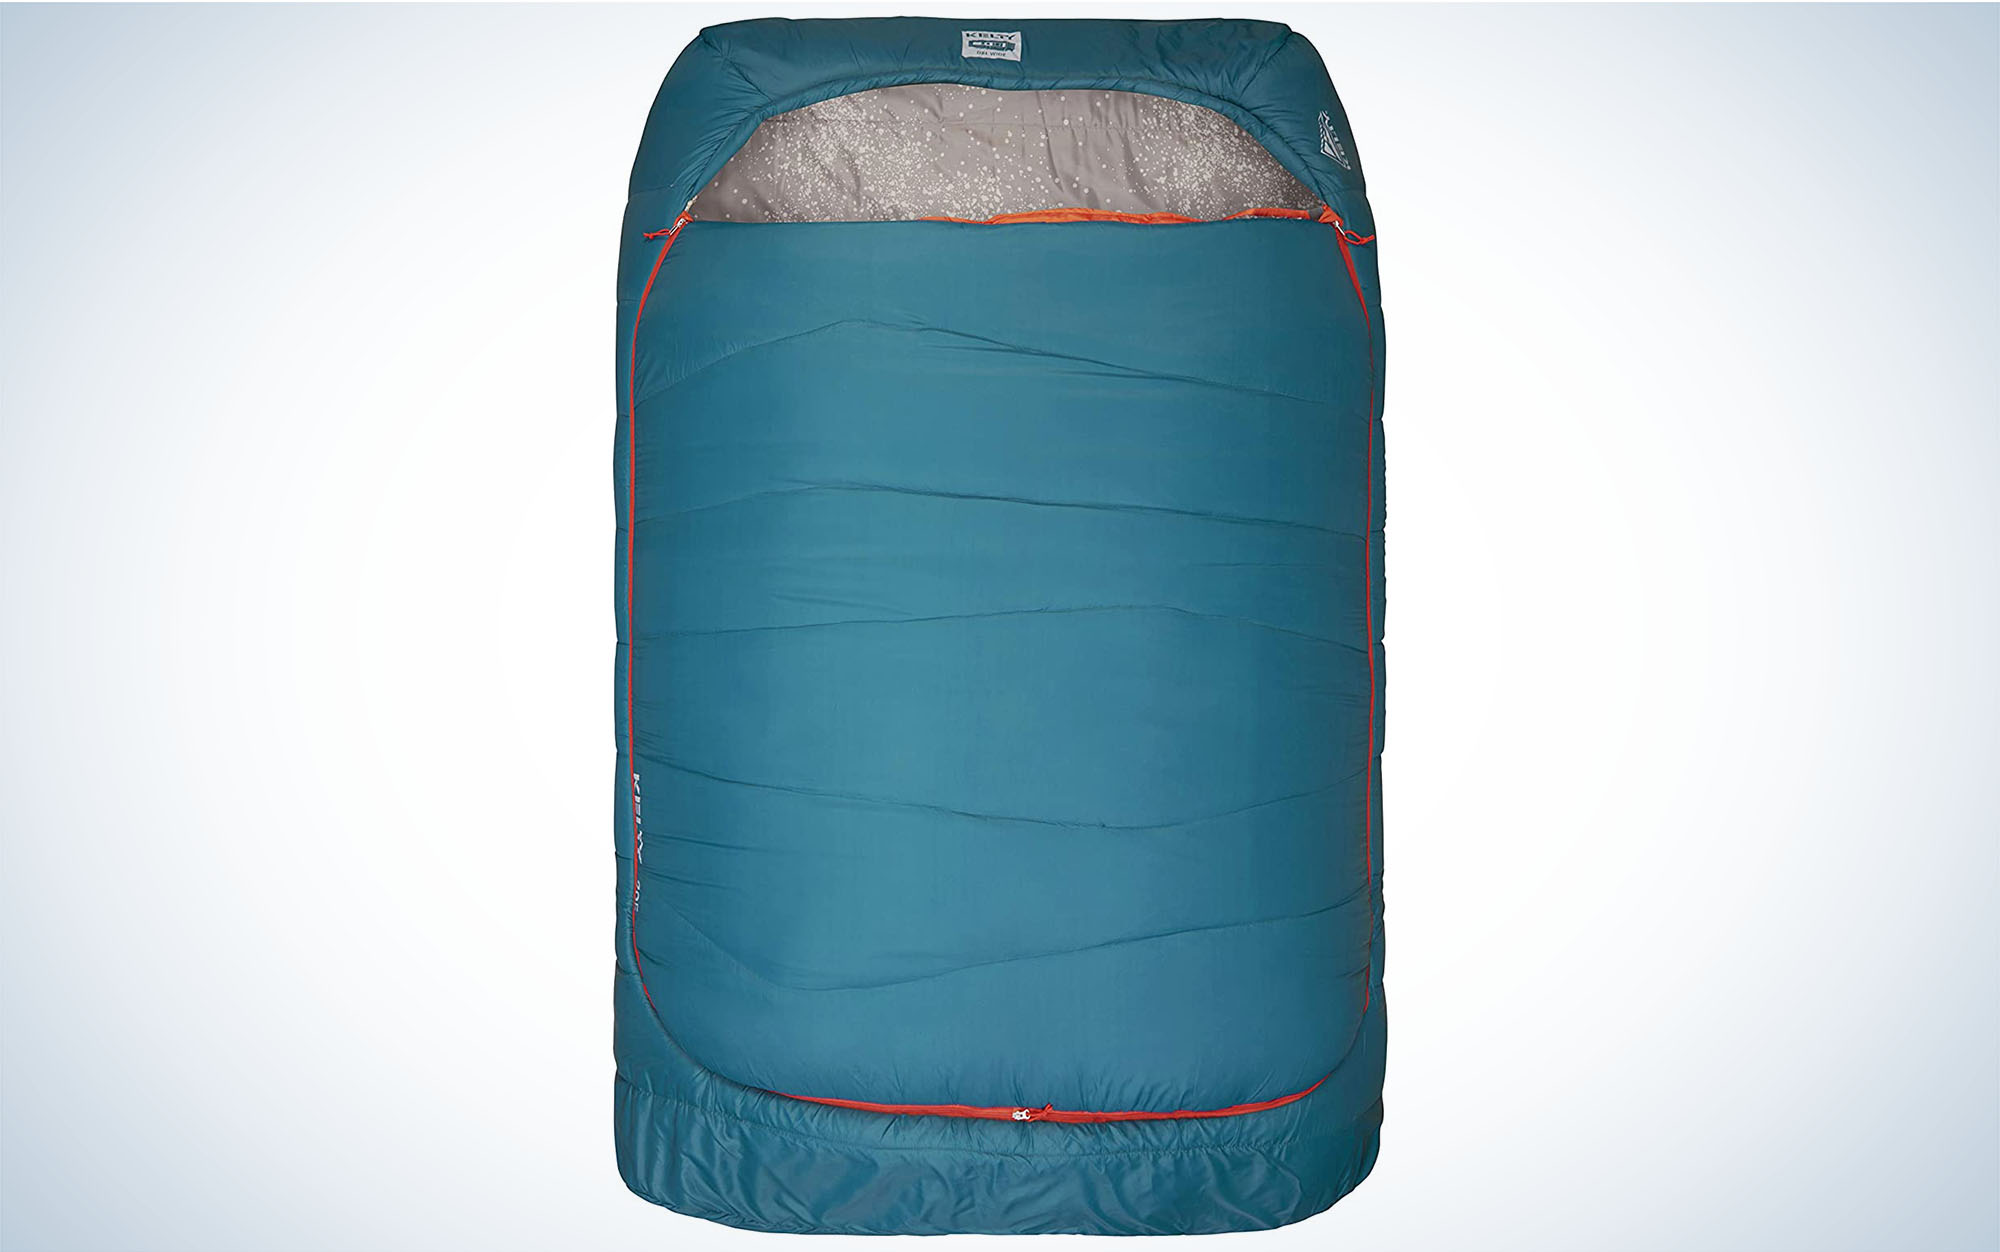 The Kelty Tru Comfort Doublewide is the best sleeping bag for camping four couples.